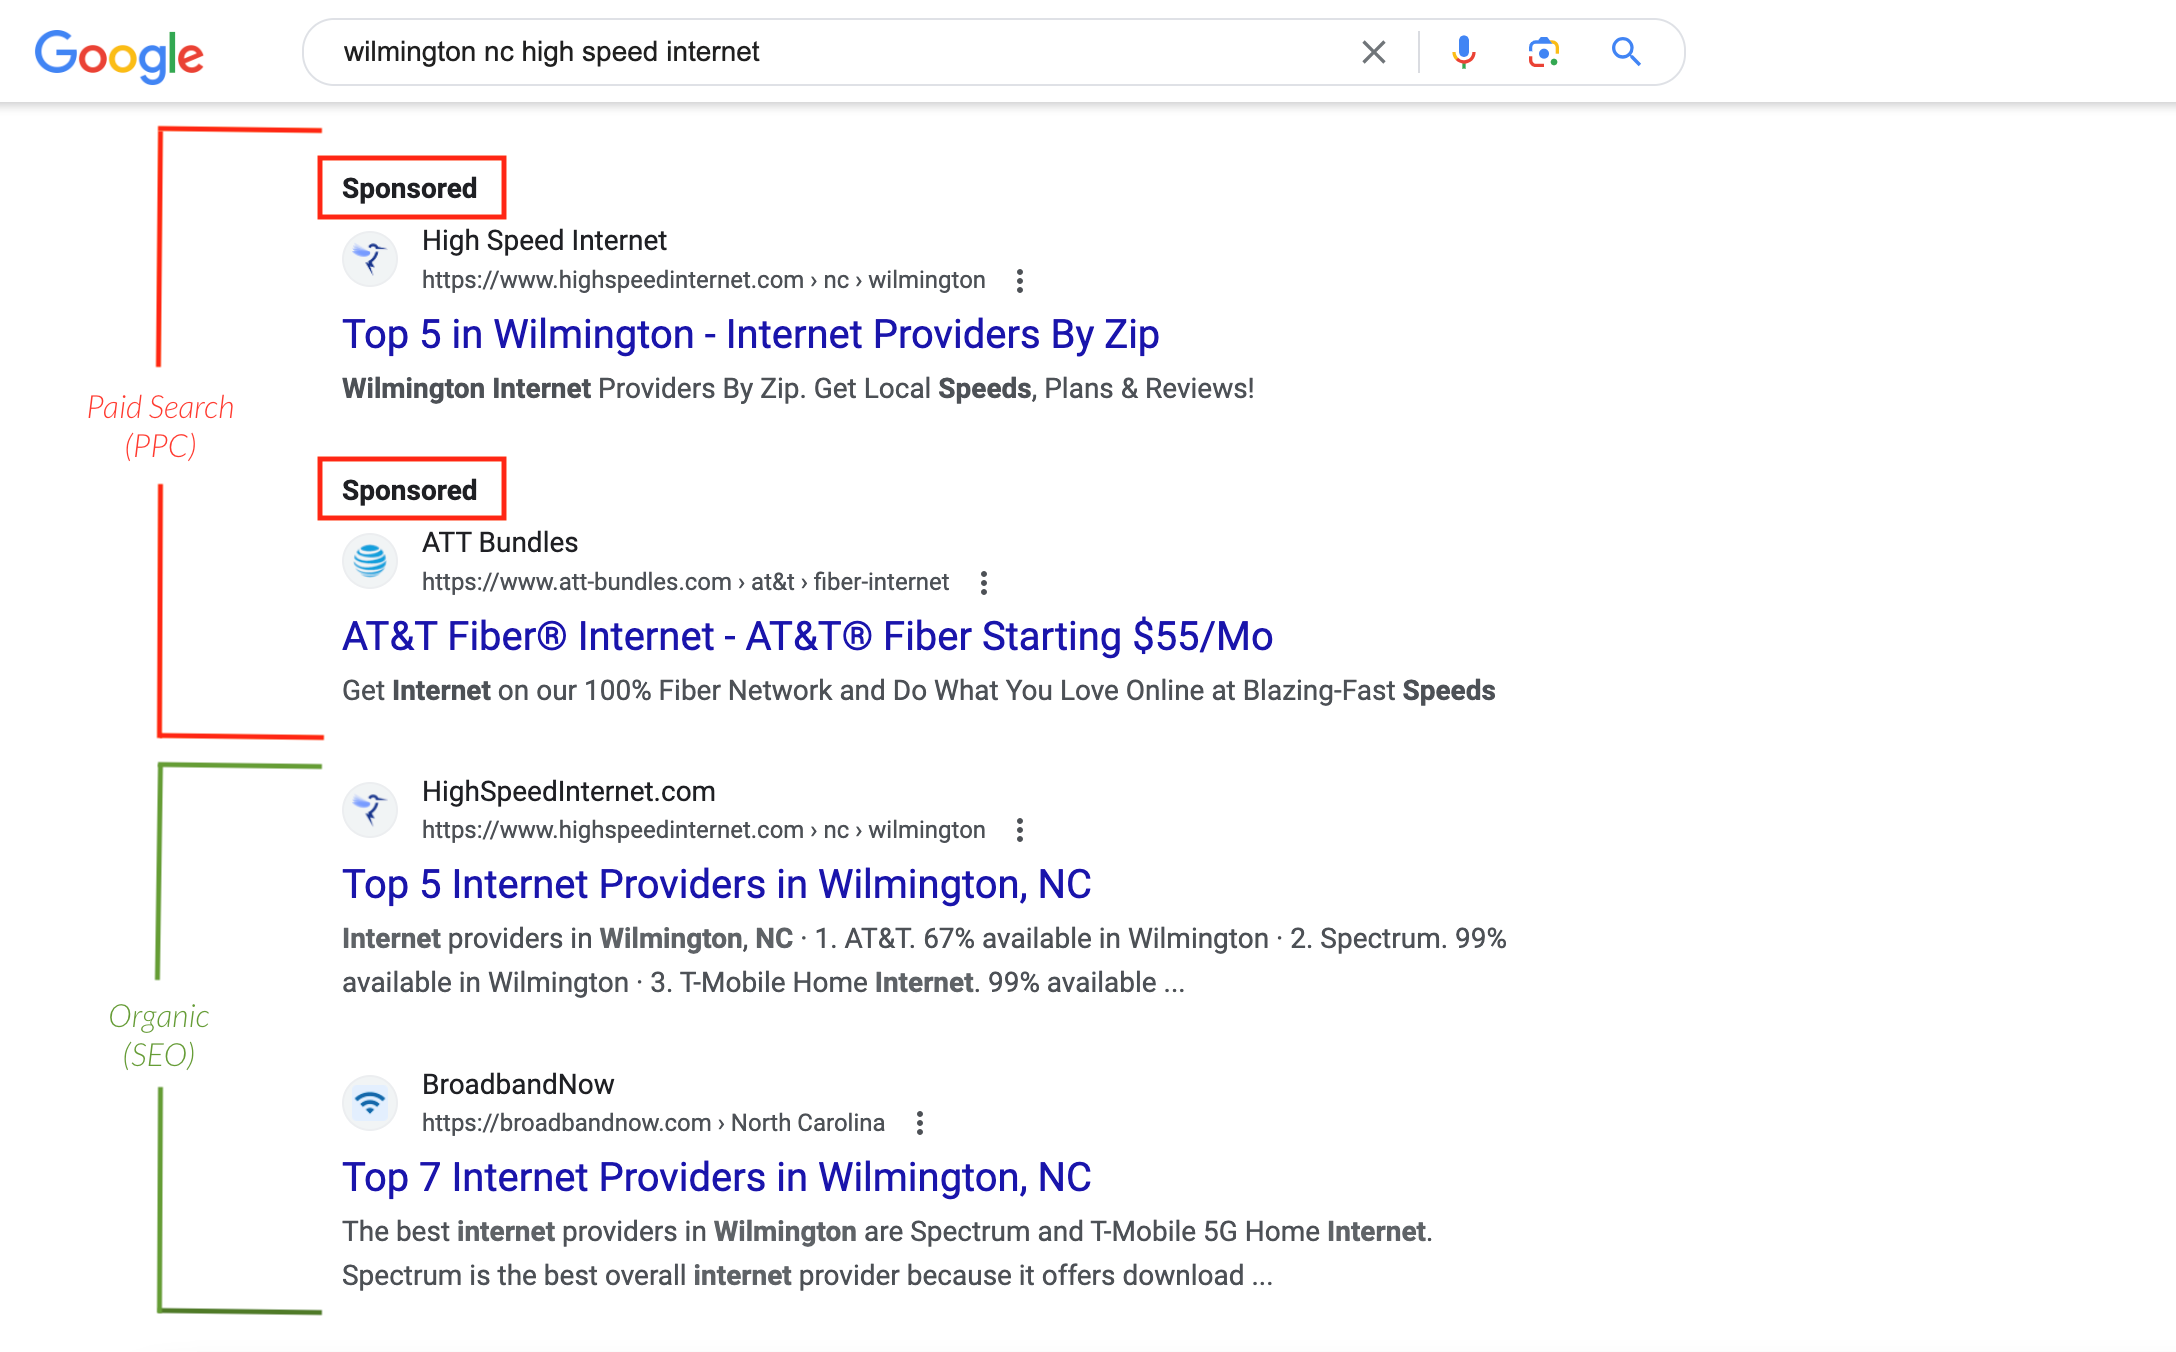 SEO vs. PPC in search engine results page